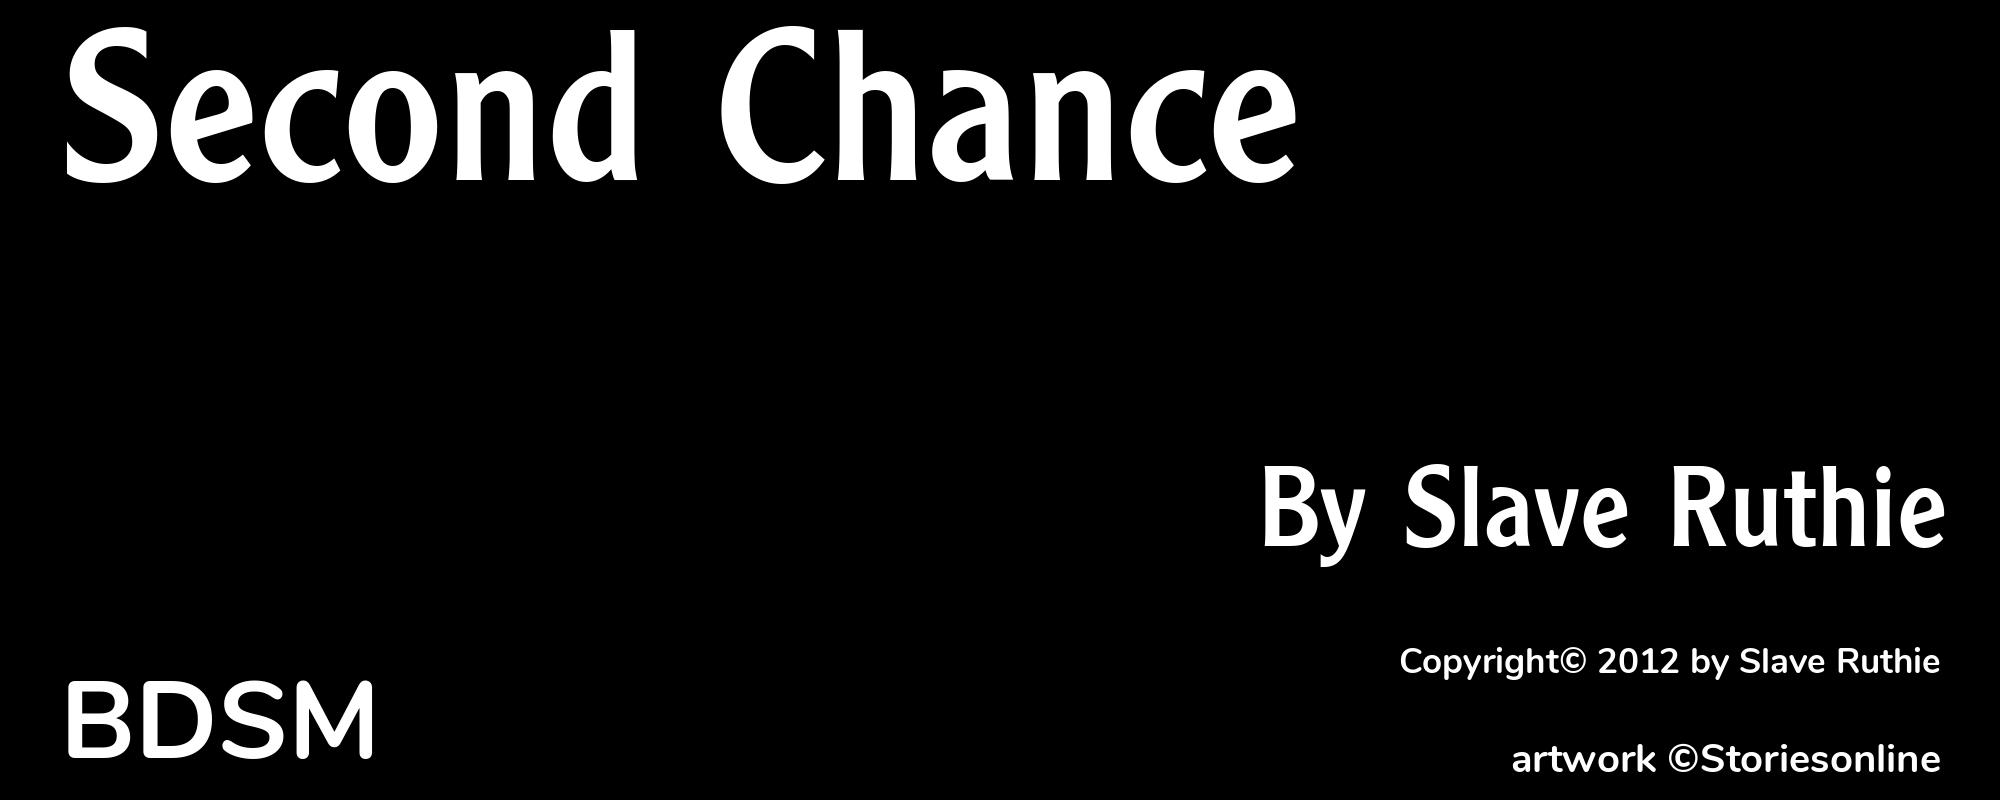 Second Chance - Cover